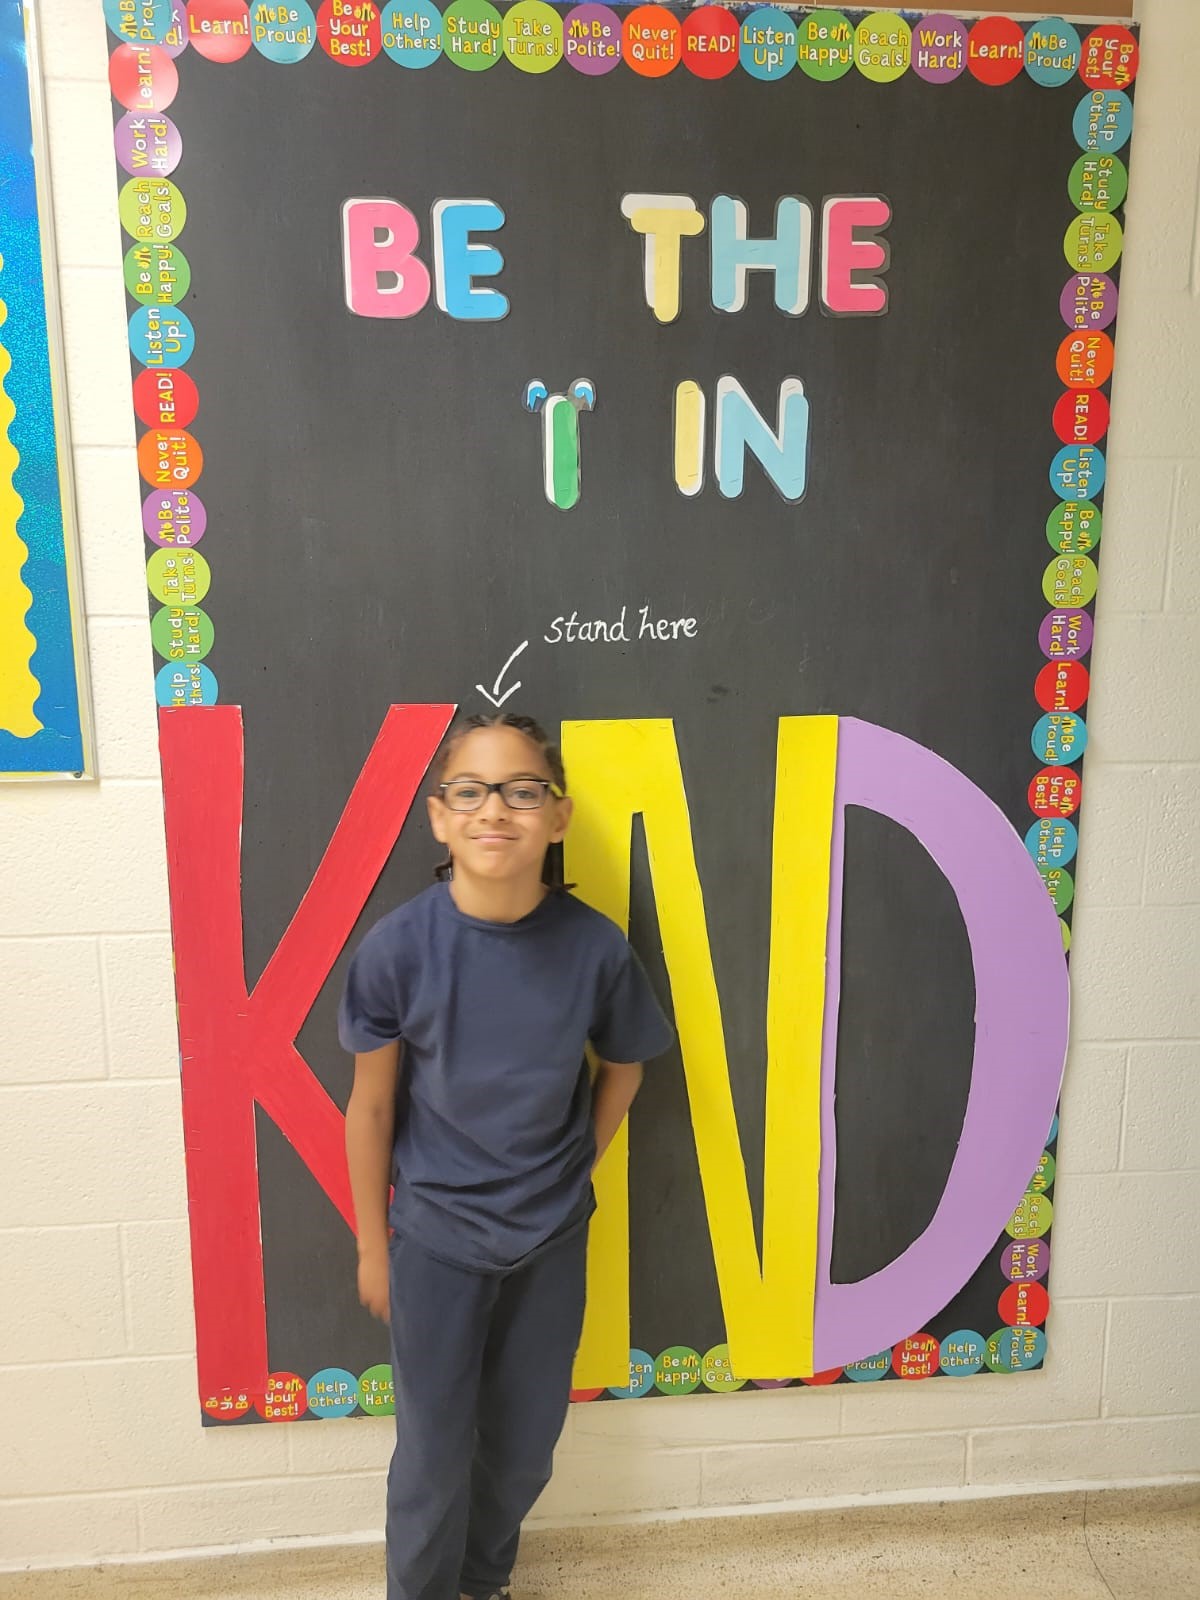 Student in uniform posing in front of a "Be the I in Kind" poster